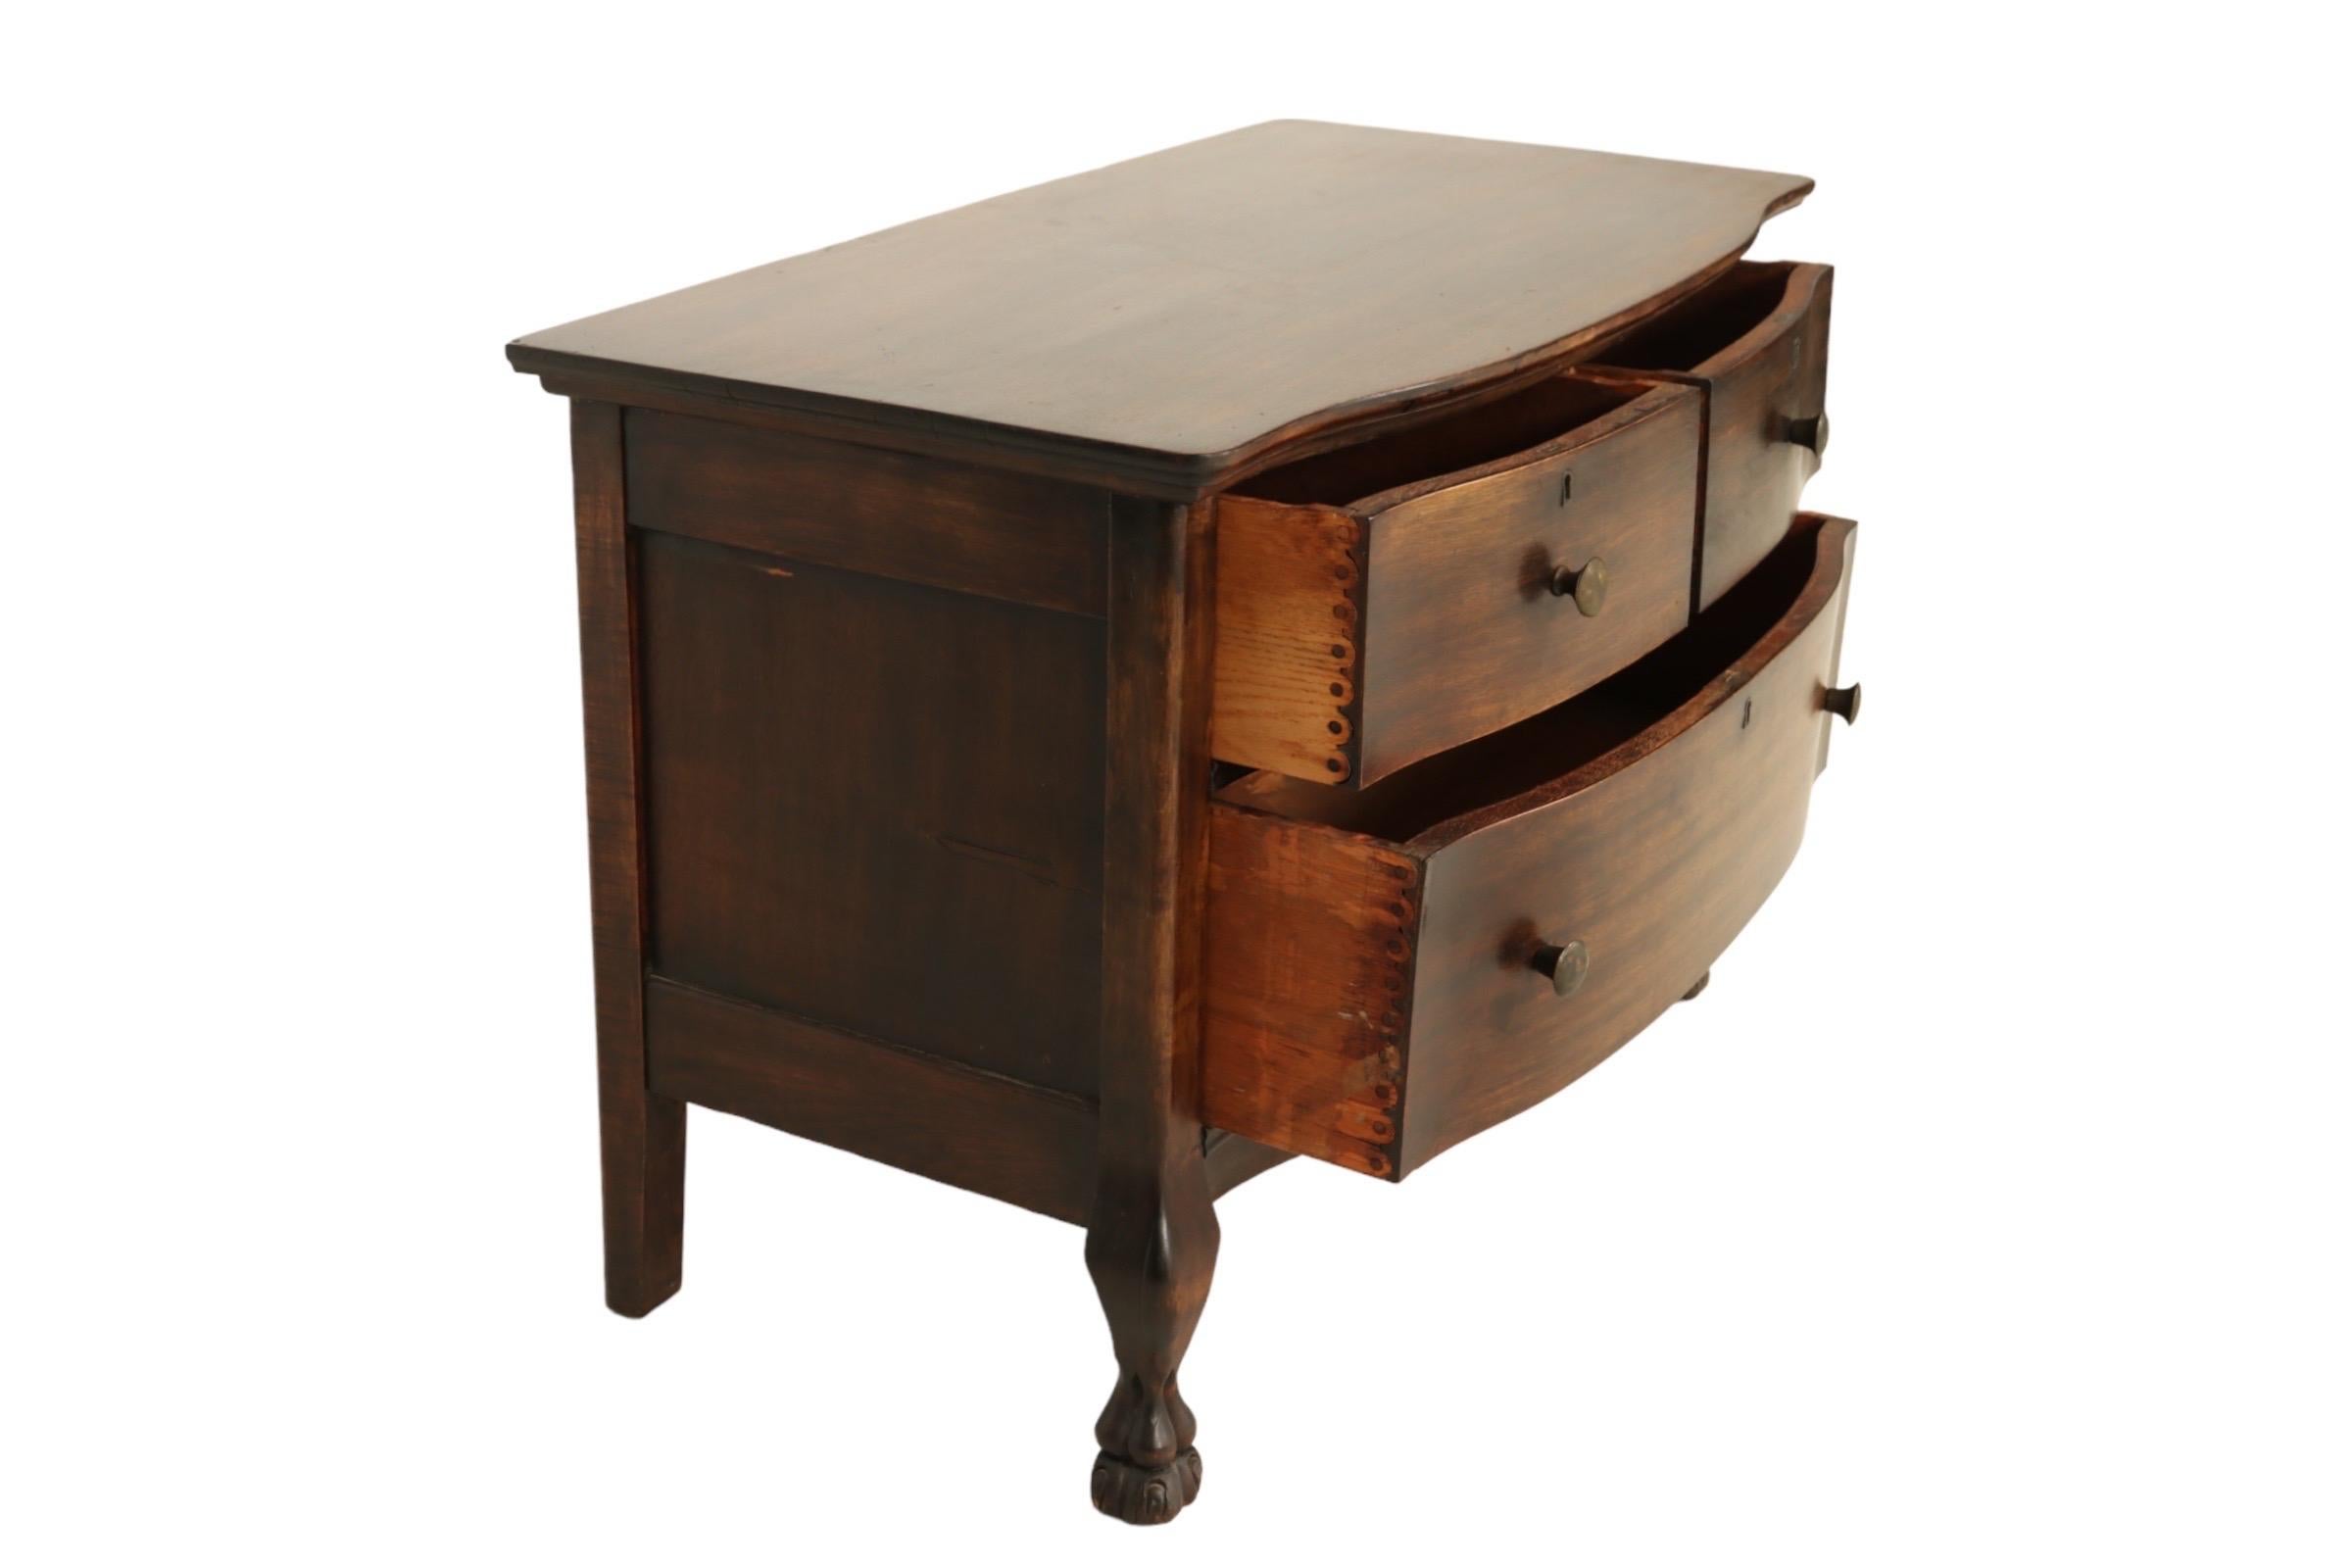 A regency style three drawer low dresser with a restrained bowed front. Drawers with pin and scallop joinery open with round metal knob handles. Below, short cabriole legs finish in paw feet.
 